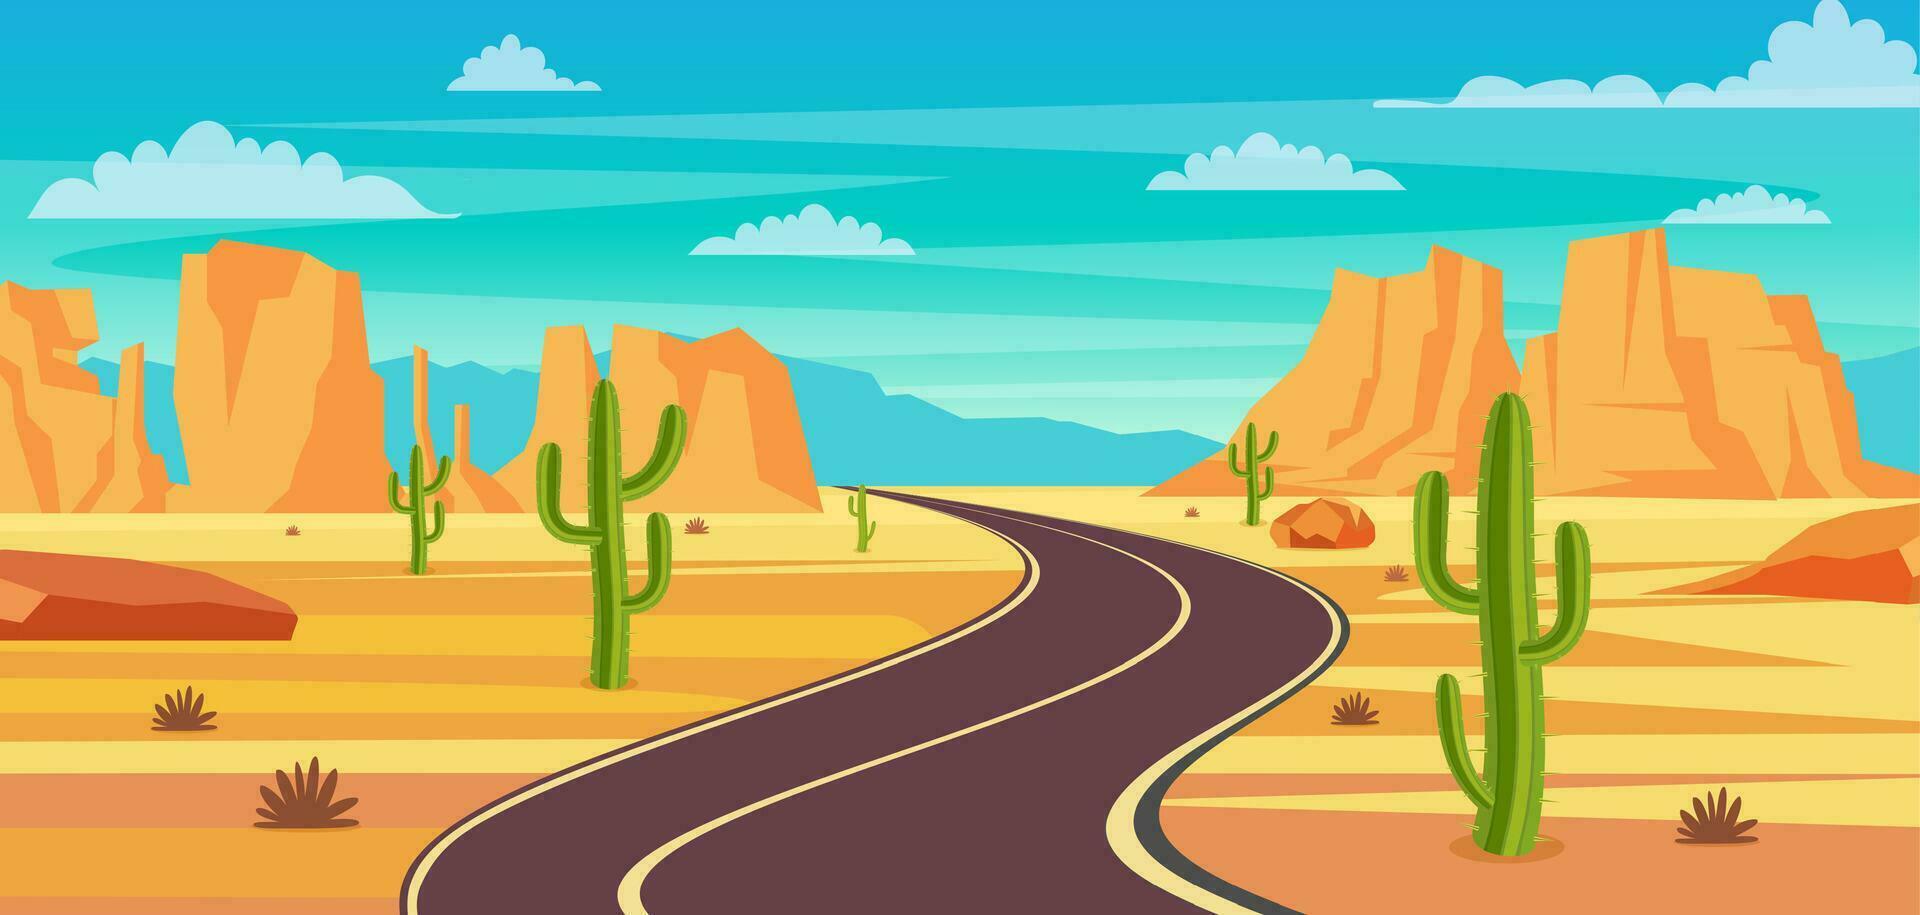 Empty highway road in desert. Sandy desert landscape with road, rocks and cactuses. Summer western american landscape. highway in Arizona or Mexico hot sand. Vector illustration in flat style